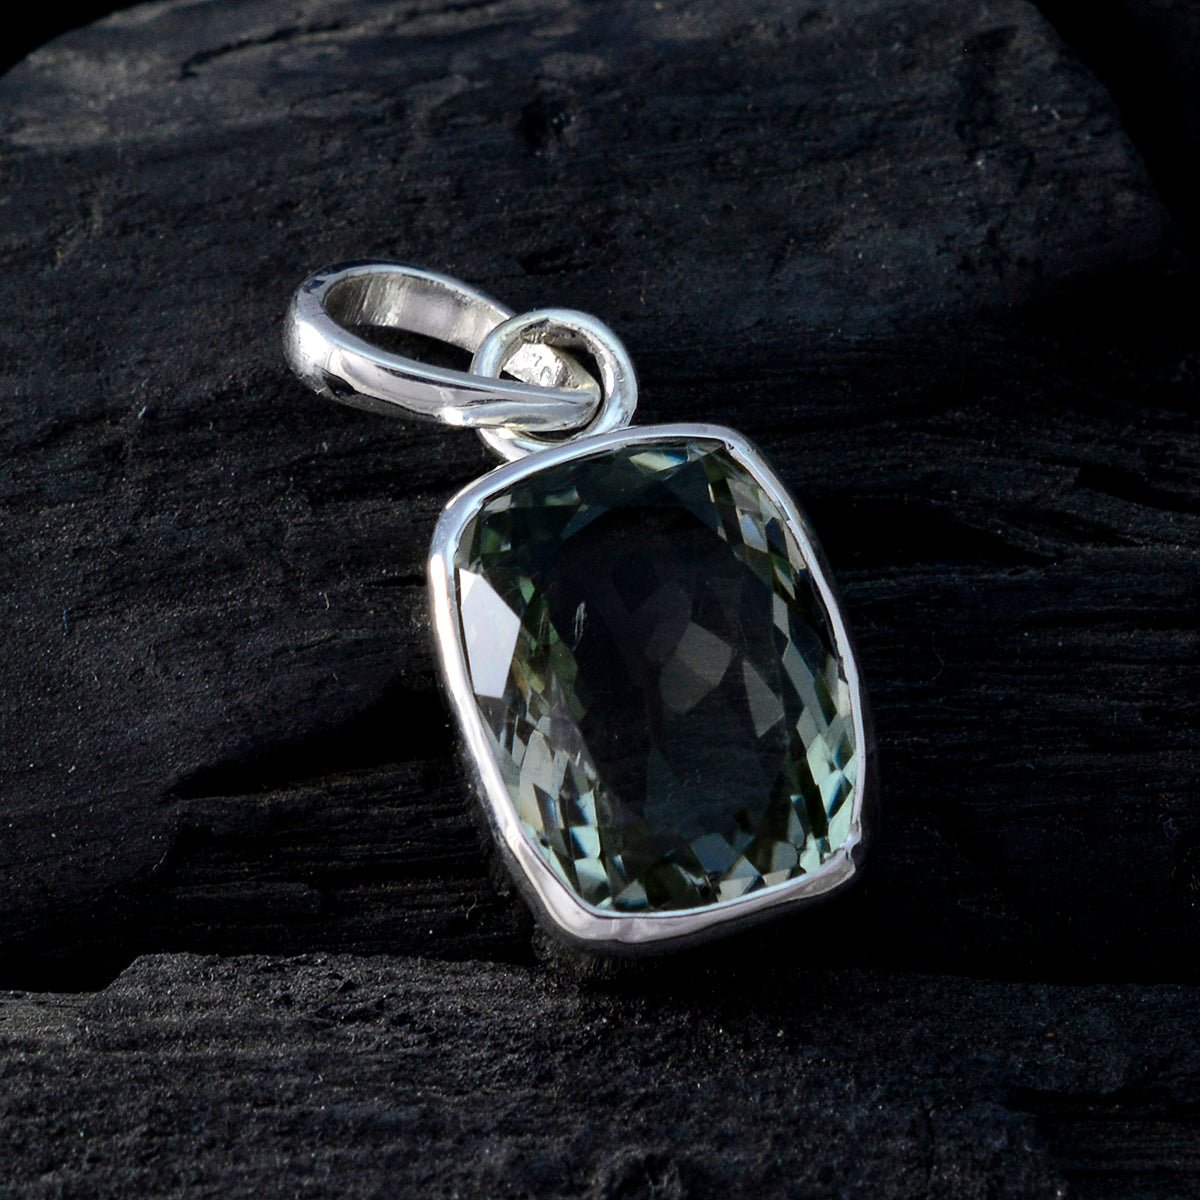 Riyo Real Gemstones Octogon Faceted Green Green Amethyst Sterling Silver Pendant independence day gift